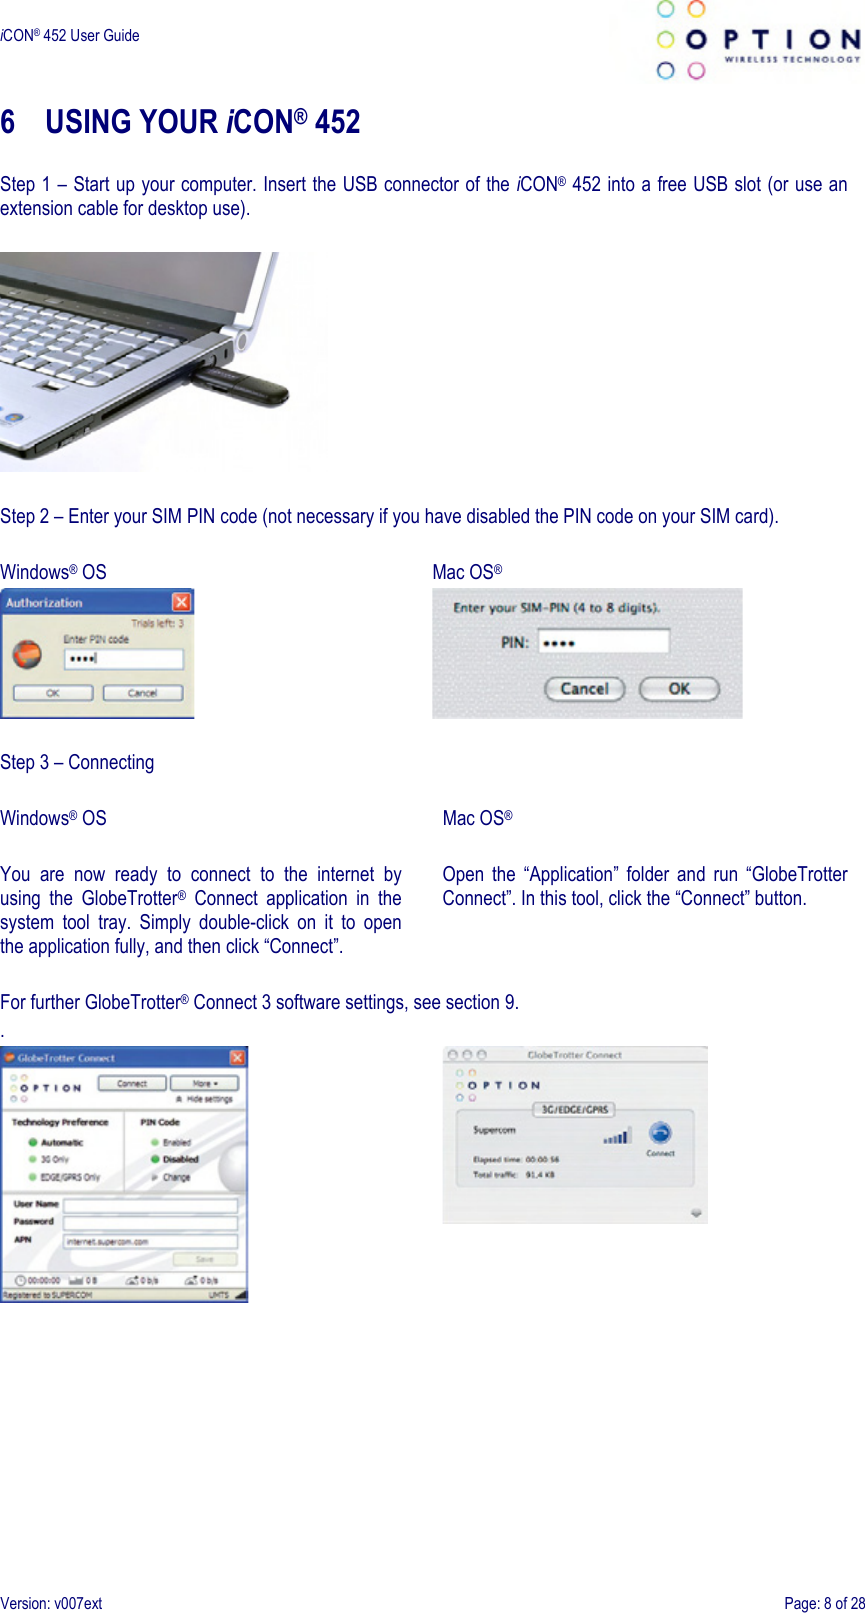  iCON® 452 User Guide     Version: v007ext  Page: 8 of 28 6 USING YOUR iCON® 452  Step 1 – Start up your computer. Insert the USB connector of the iCON® 452 into a free USB slot (or use an extension cable for desktop use).    Step 2 – Enter your SIM PIN code (not necessary if you have disabled the PIN code on your SIM card).  Windows® OS   Mac OS®     Step 3 – Connecting  Windows® OS  You  are  now  ready  to  connect  to  the  internet  by using  the  GlobeTrotter®  Connect  application  in  the system  tool  tray.  Simply  double-click  on  it  to  open the application fully, and then click “Connect”.  Mac OS®  Open  the  “Application”  folder  and  run  “GlobeTrotter Connect”. In this tool, click the “Connect” button. For further GlobeTrotter® Connect 3 software settings, see section 9. .    